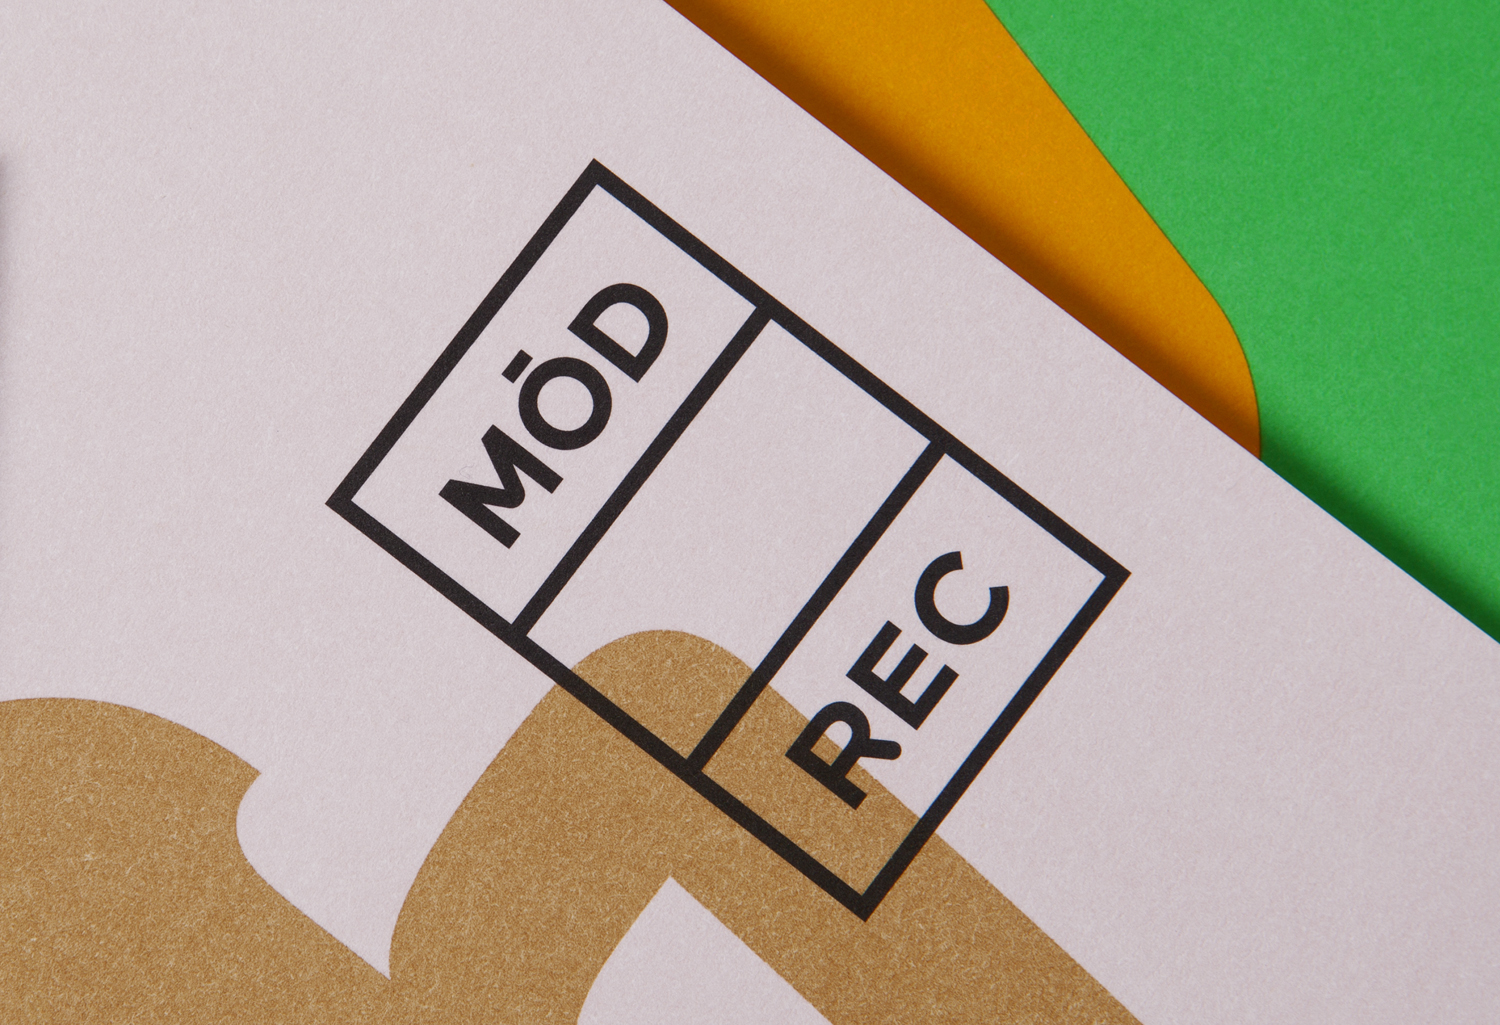 Graphic identity and print by Blok for subscription coffee service Modern Recreation